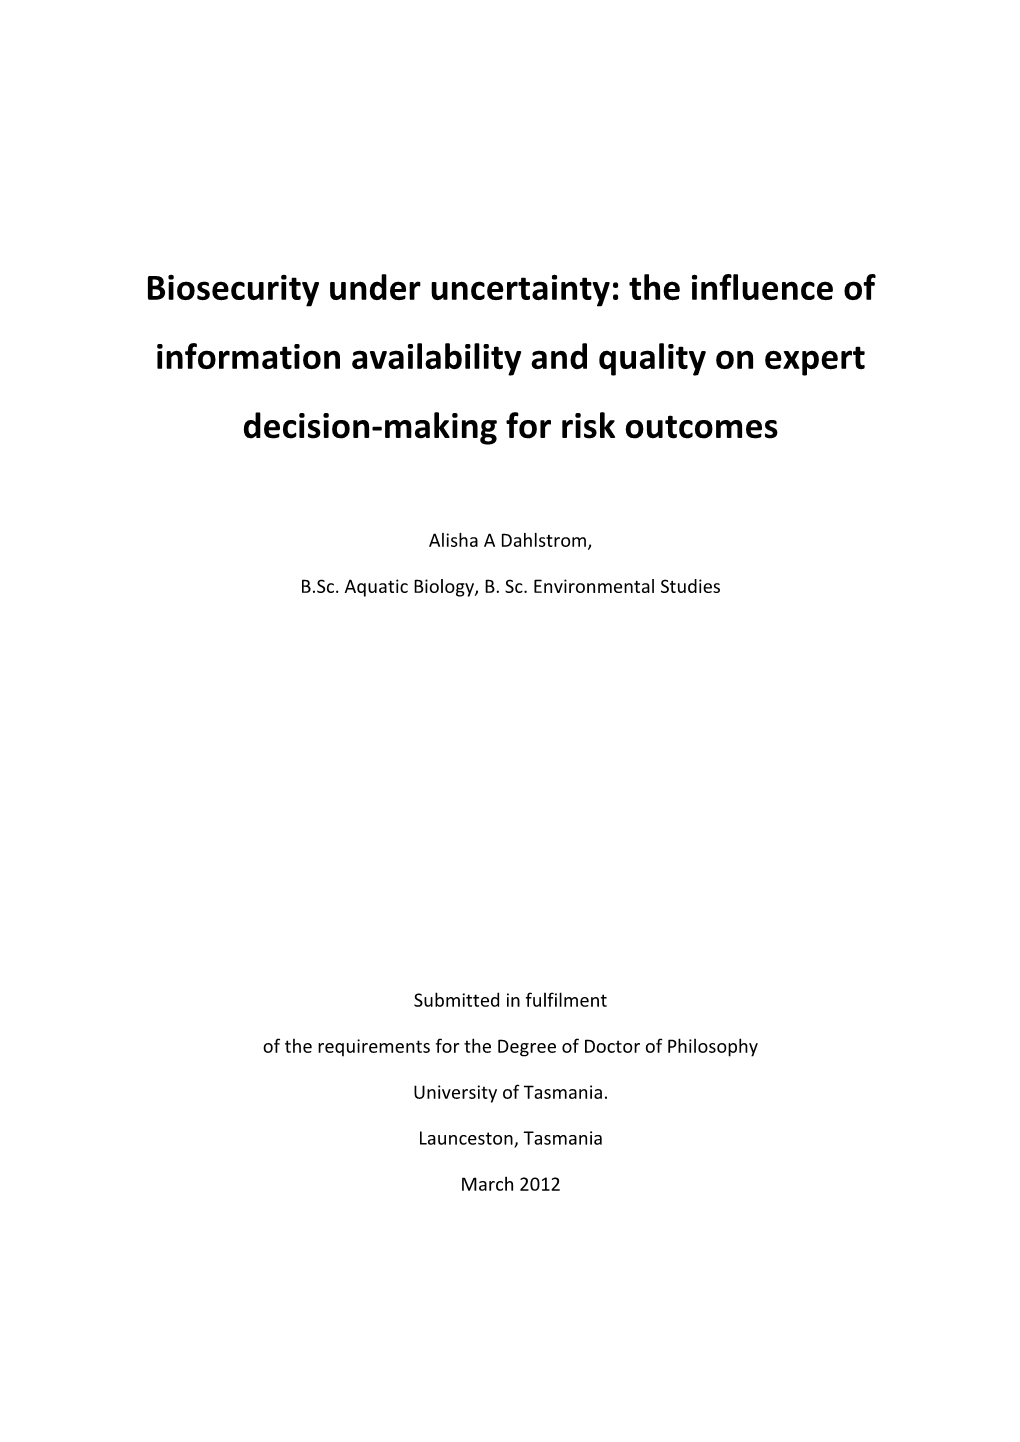 Biosecurity Under Uncertainty: the Influence of Information Availability and Quality on Expert Decision-Making for Risk Outcomes